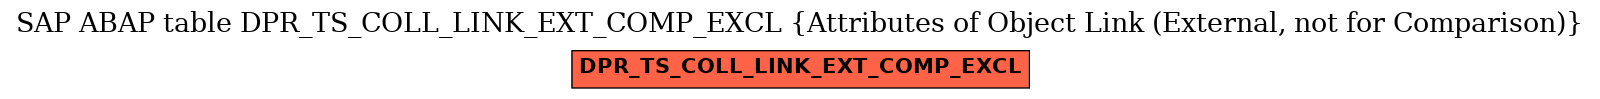 E-R Diagram for table DPR_TS_COLL_LINK_EXT_COMP_EXCL (Attributes of Object Link (External, not for Comparison))